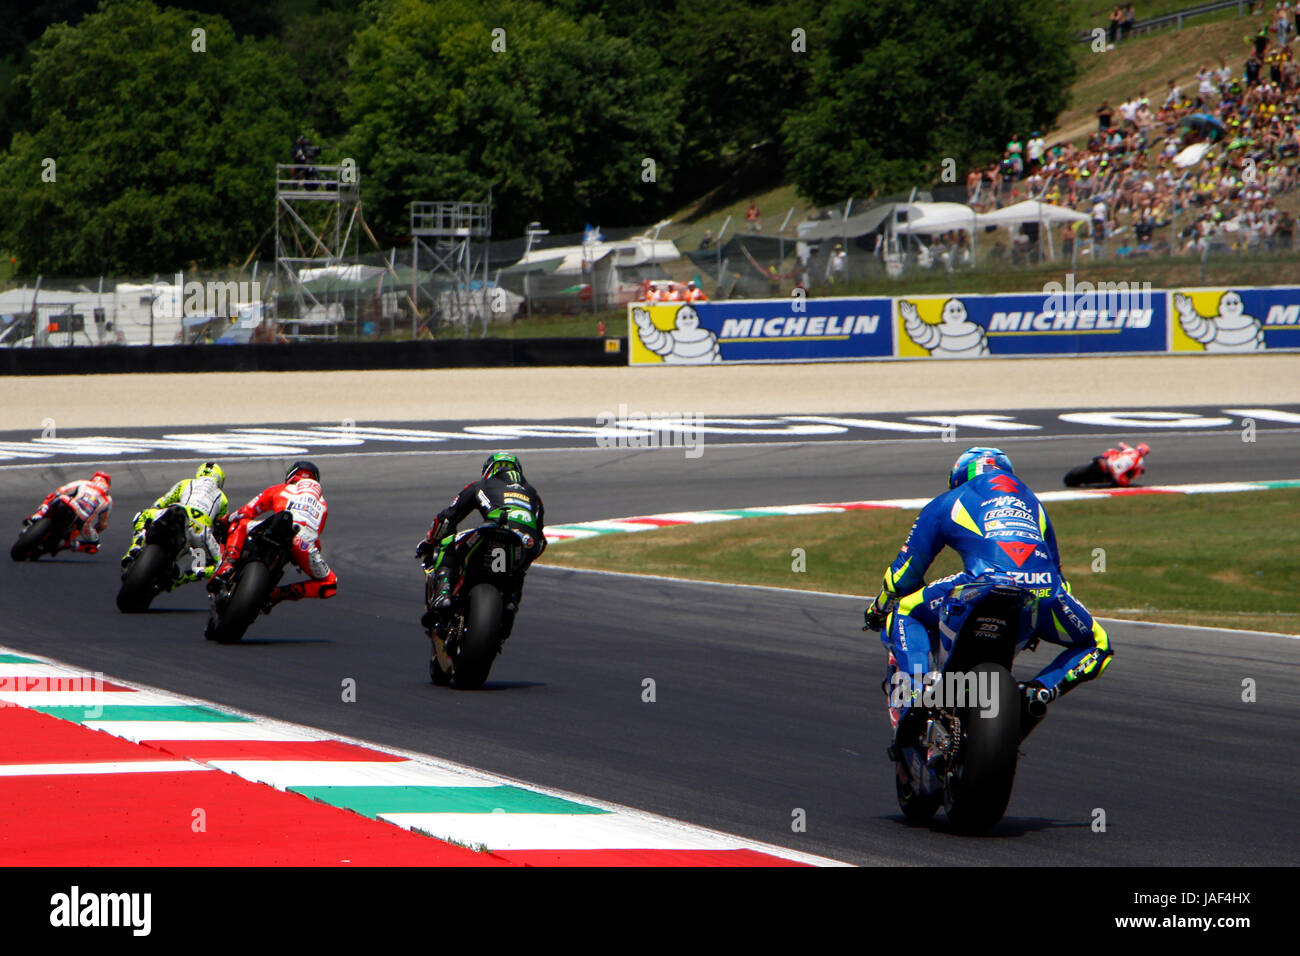 Florence, Italy. 04th June, 2017. A pack of MotoGP bikes approach the first  corner, San Donato, at the Mugello Circuit at the 2017 Italian Motorcycle  Grand Prix. Credit: Joseph Suschitzky/Alamy Live News